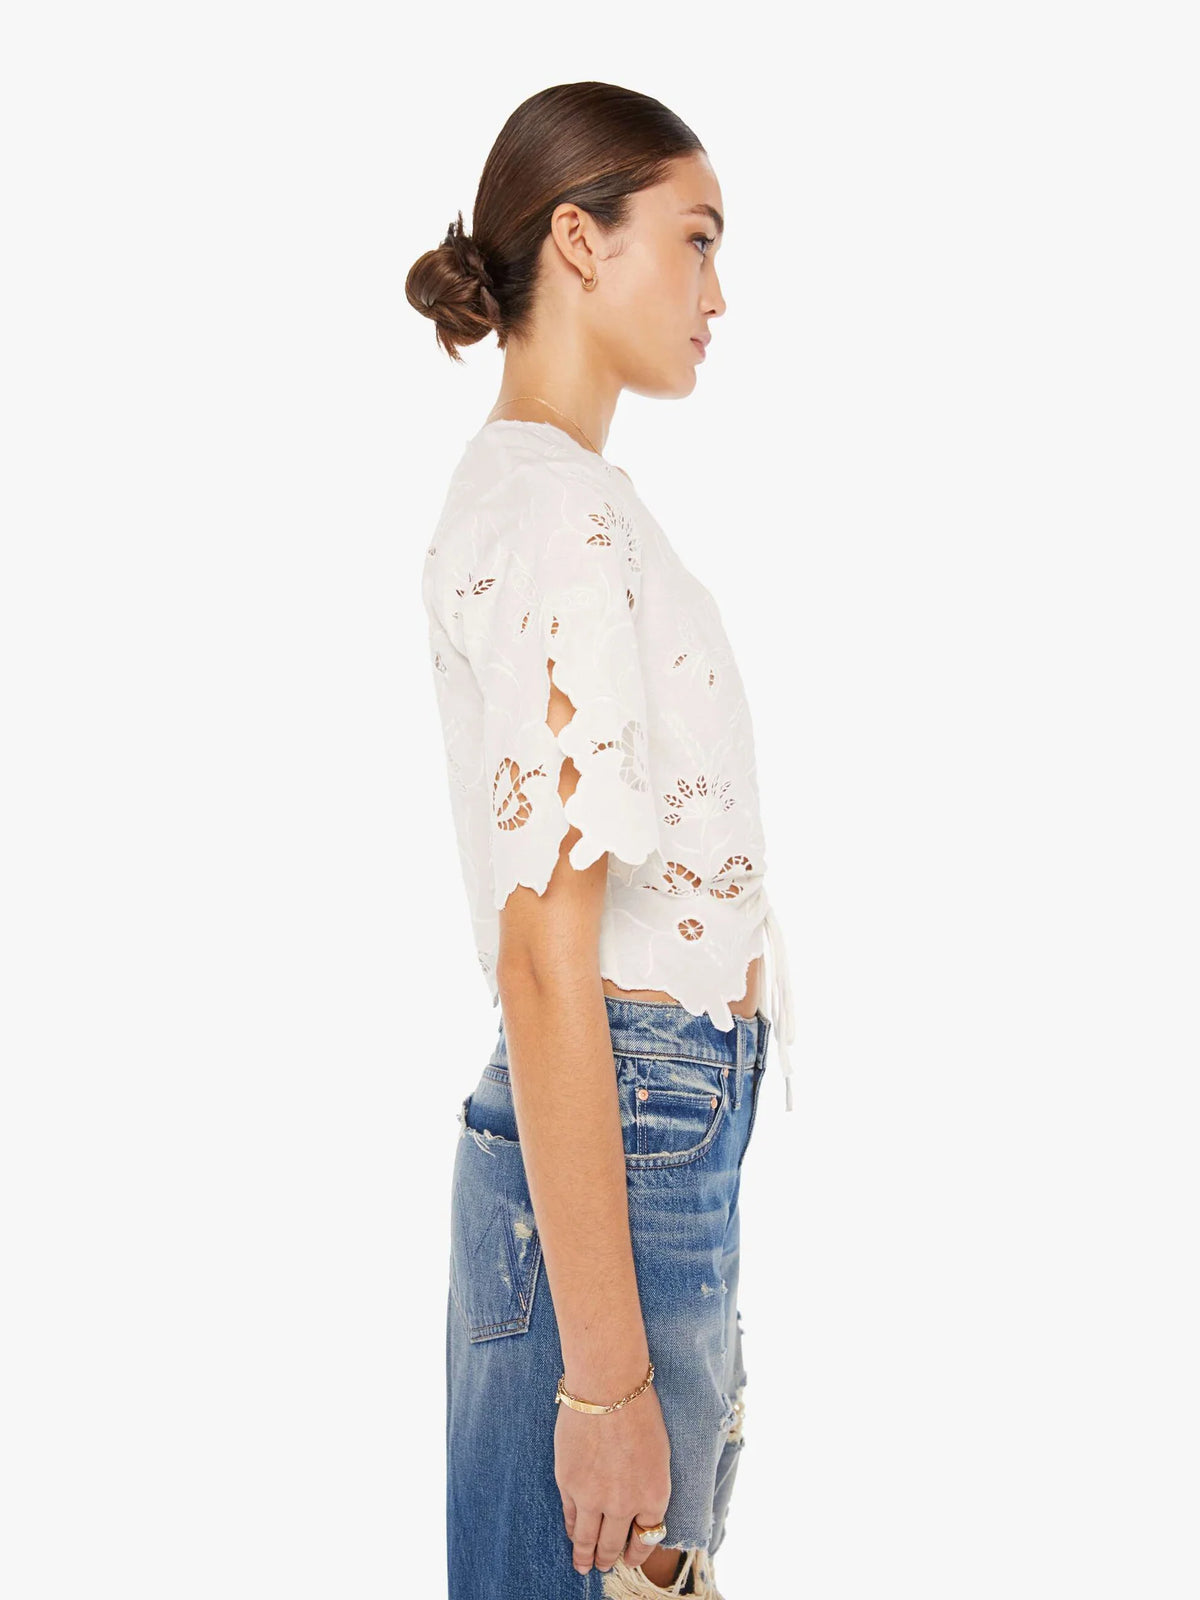 The Social Butterfly Top